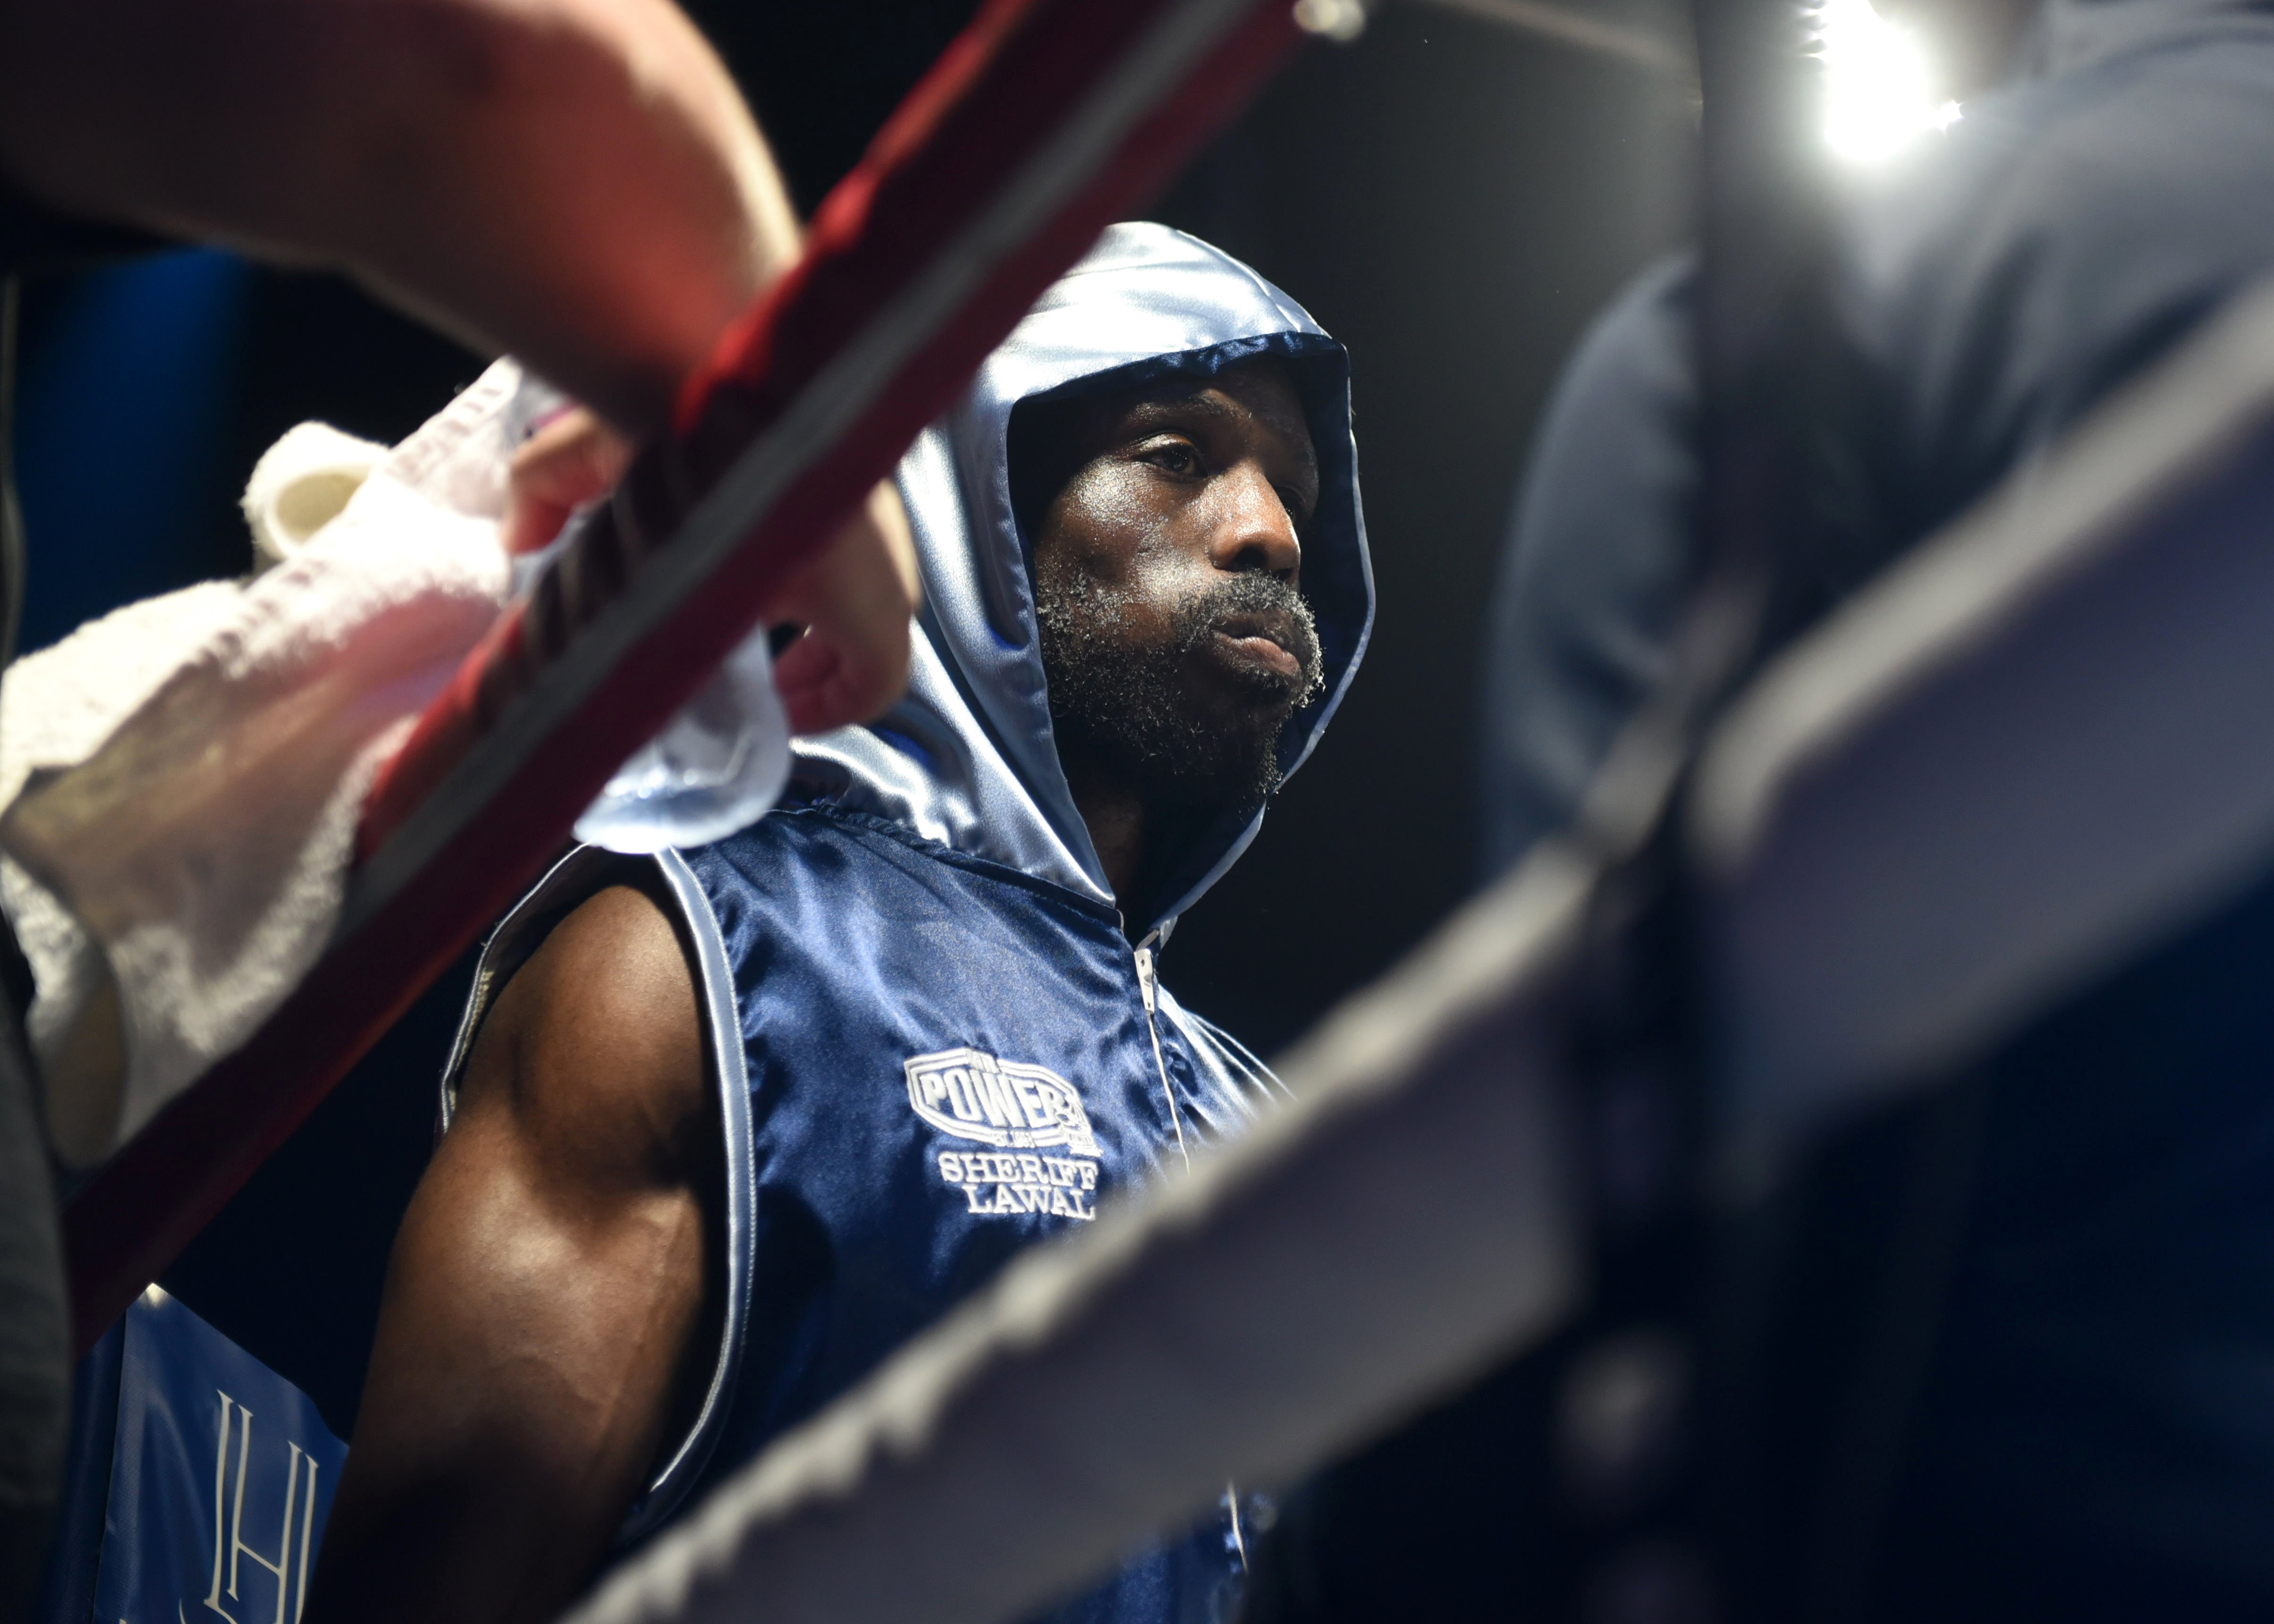 Boxer Sherif Lawal passed away after suffering a knockdown in his pro debut